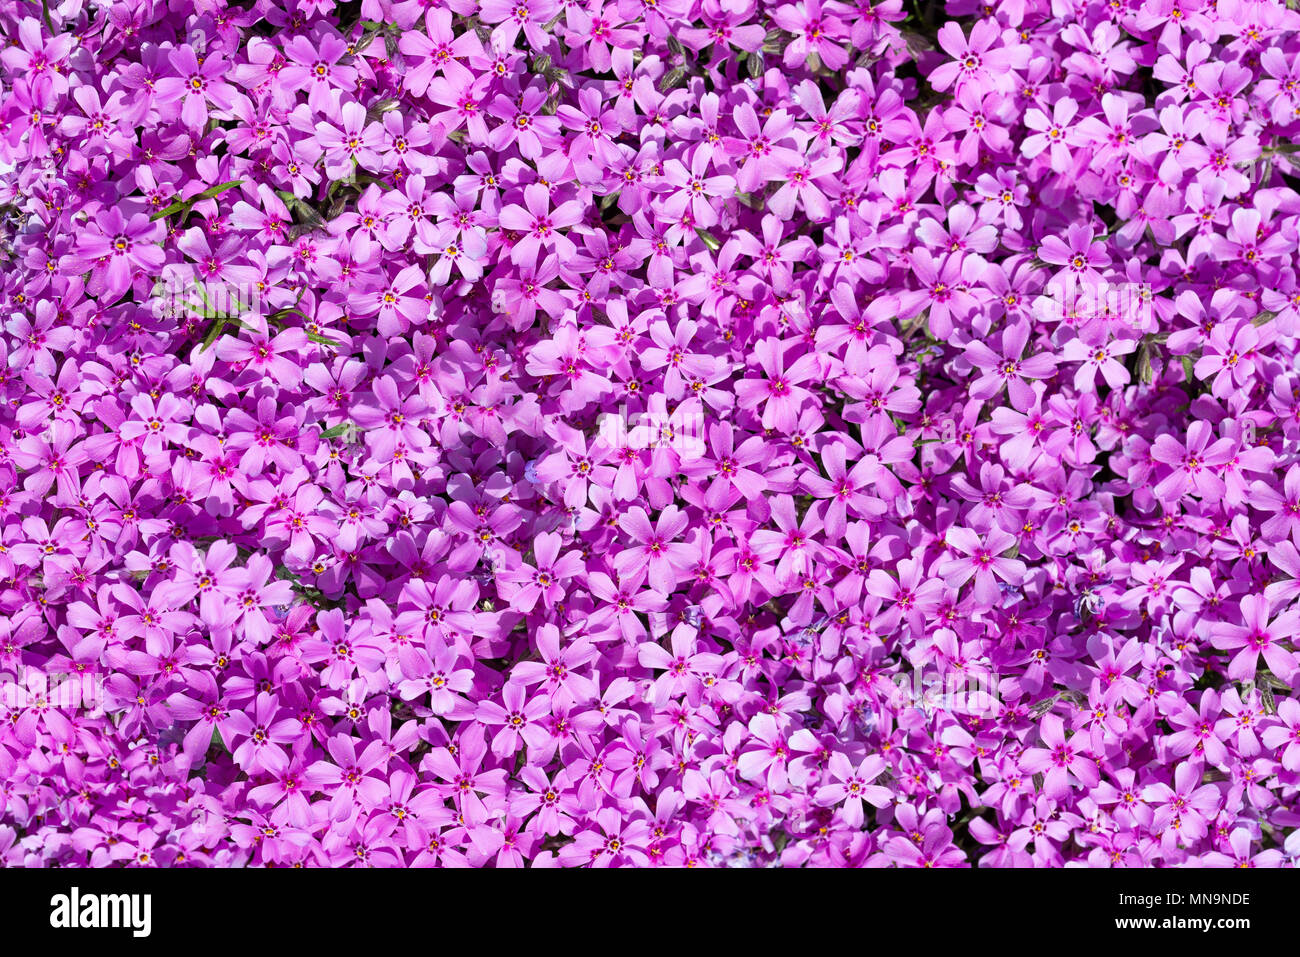 Horizontal photo with carpet created by pink and purple phlox flowers. Blooms with colorful leaves fills complete space of picture. Stock Photo